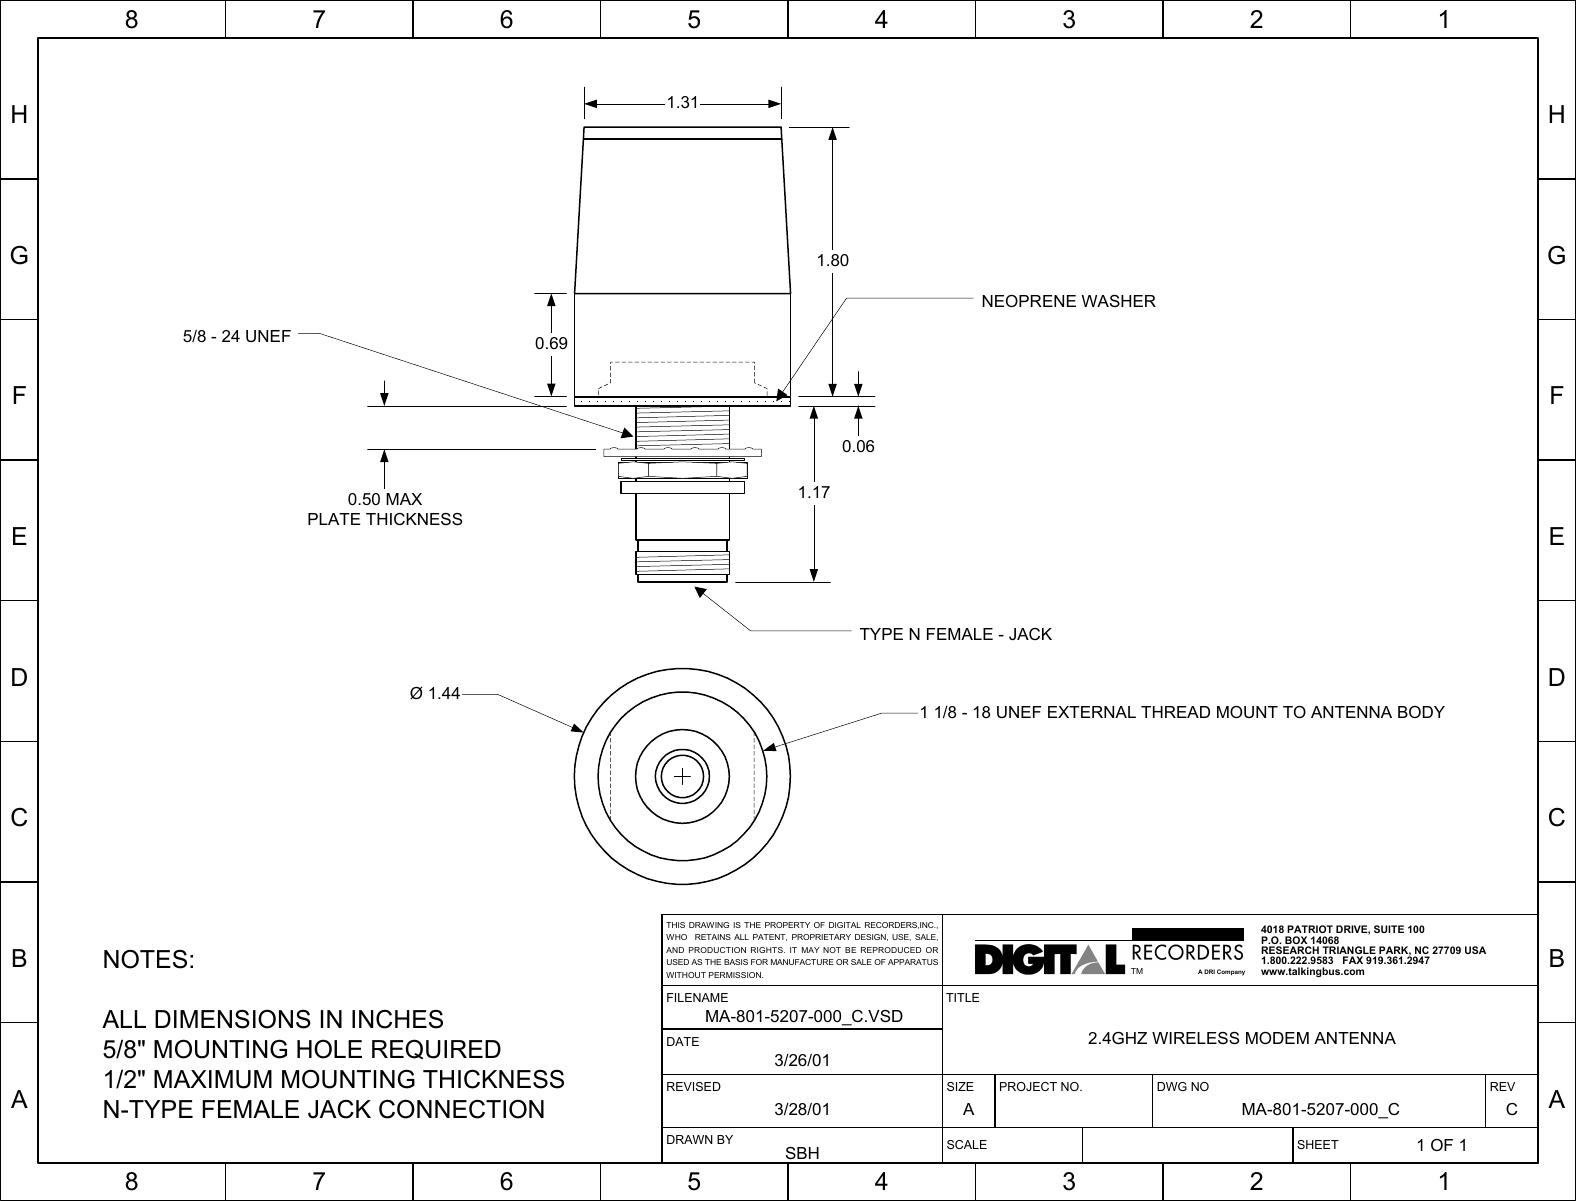 HGFEDCBA87654321HGFEDCBA87654321SIZE PROJECT NO. DWG NO REVA MA-801-5207-000_C CSCALE SHEET1 OF 1TITLE2.4GHZ WIRELESS MODEM ANTENNAREVISED3/28/01FILENAMEMA-801-5207-000_C.VSDDRAWN BYSBHDATE3/26/014018 PATRIOT DRIVE, SUITE 100P.O. BOX 14068RESEARCH TRIANGLE PARK, NC 27709 USA1.800.222.9583   FAX 919.361.2947www.talkingbus.comTMA DRI CompanyTHIS DRAWING IS THE PROPERTY OF DIGITAL RECORDERS,INC.,WHO  RETAINS ALL PATENT, PROPRIETARY DESIGN, USE, SALE,AND PRODUCTION RIGHTS. IT MAY NOT BE REPRODUCED ORUSED AS THE BASIS FOR MANUFACTURE OR SALE OF APPARATUSWITHOUT PERMISSION.NOTES:ALL DIMENSIONS IN INCHES5/8&quot; MOUNTING HOLE REQUIRED1/2&quot; MAXIMUM MOUNTING THICKNESSN-TYPE FEMALE JACK CONNECTION1.800.691.310.061.170.50 MAXPLATE THICKNESSTYPE N FEMALE - JACK5/8 - 24 UNEFNEOPRENE WASHERØ 1.441 1/8 - 18 UNEF EXTERNAL THREAD MOUNT TO ANTENNA BODY